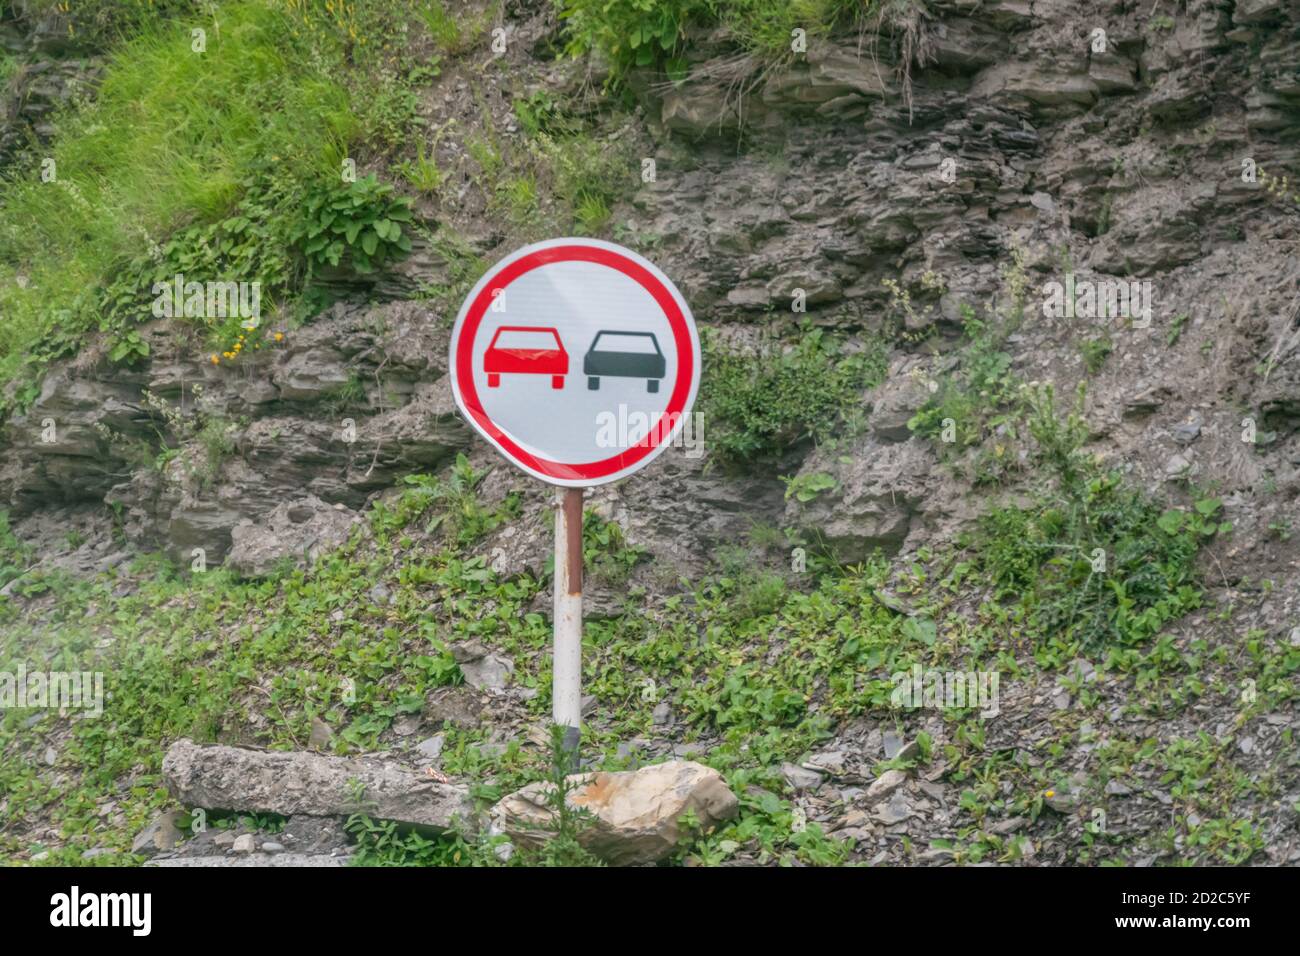 Road sign Overtaking is prohibited costs near the mountain on the road serpentine Stock Photo